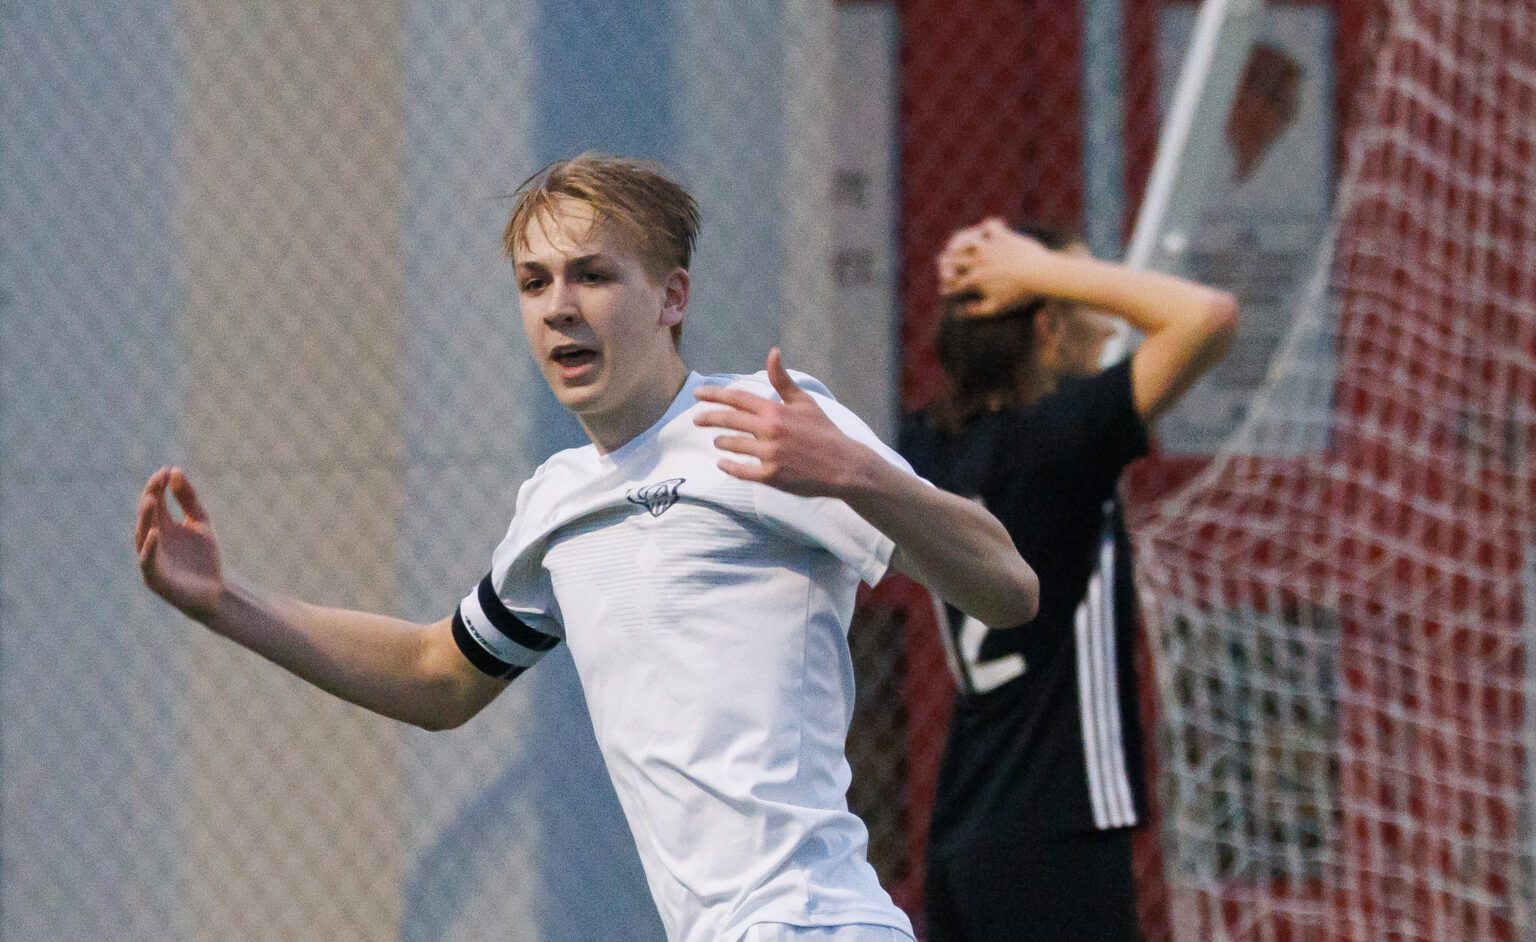 Squalicum’s Xander Koenig celebrates while a Bellingham player reacts to Koenig’s second goal May 1 as Squalicum beat Bellingham 3-1 in Bellingham.